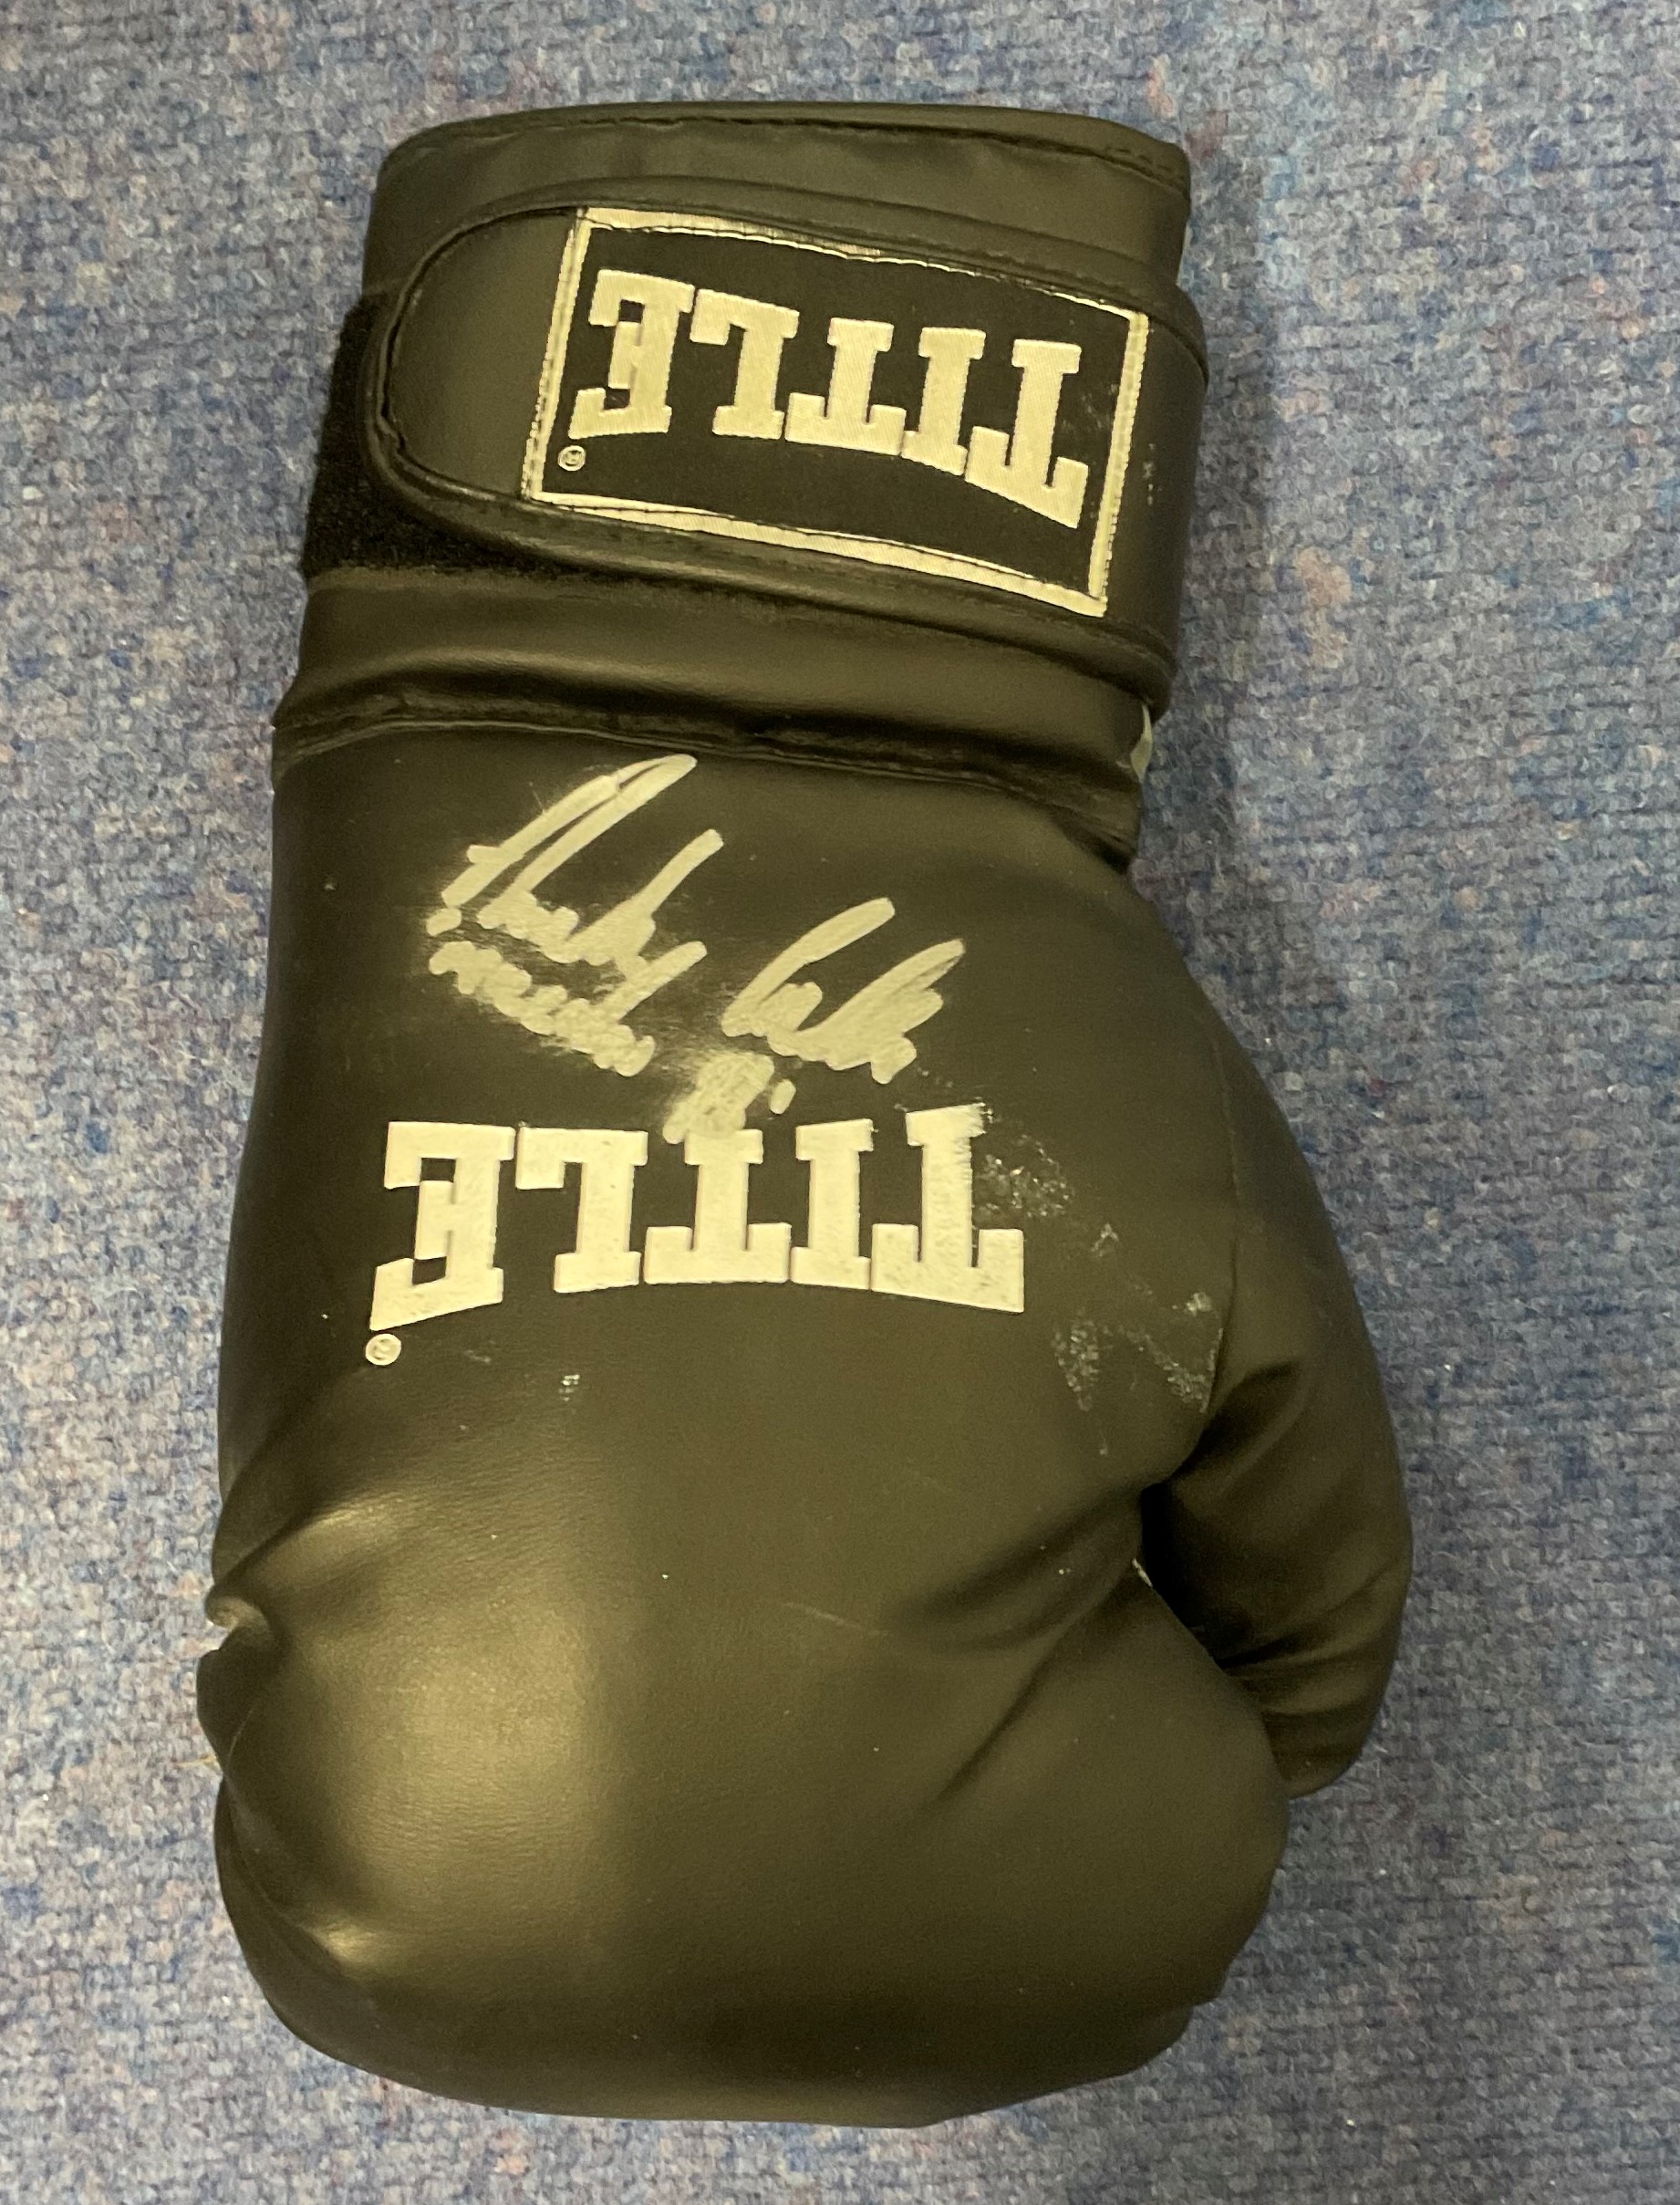 Boxing Anthony Crolla signed Black Title Boxing glove. Anthony Crolla (born 16 November 1986) is a